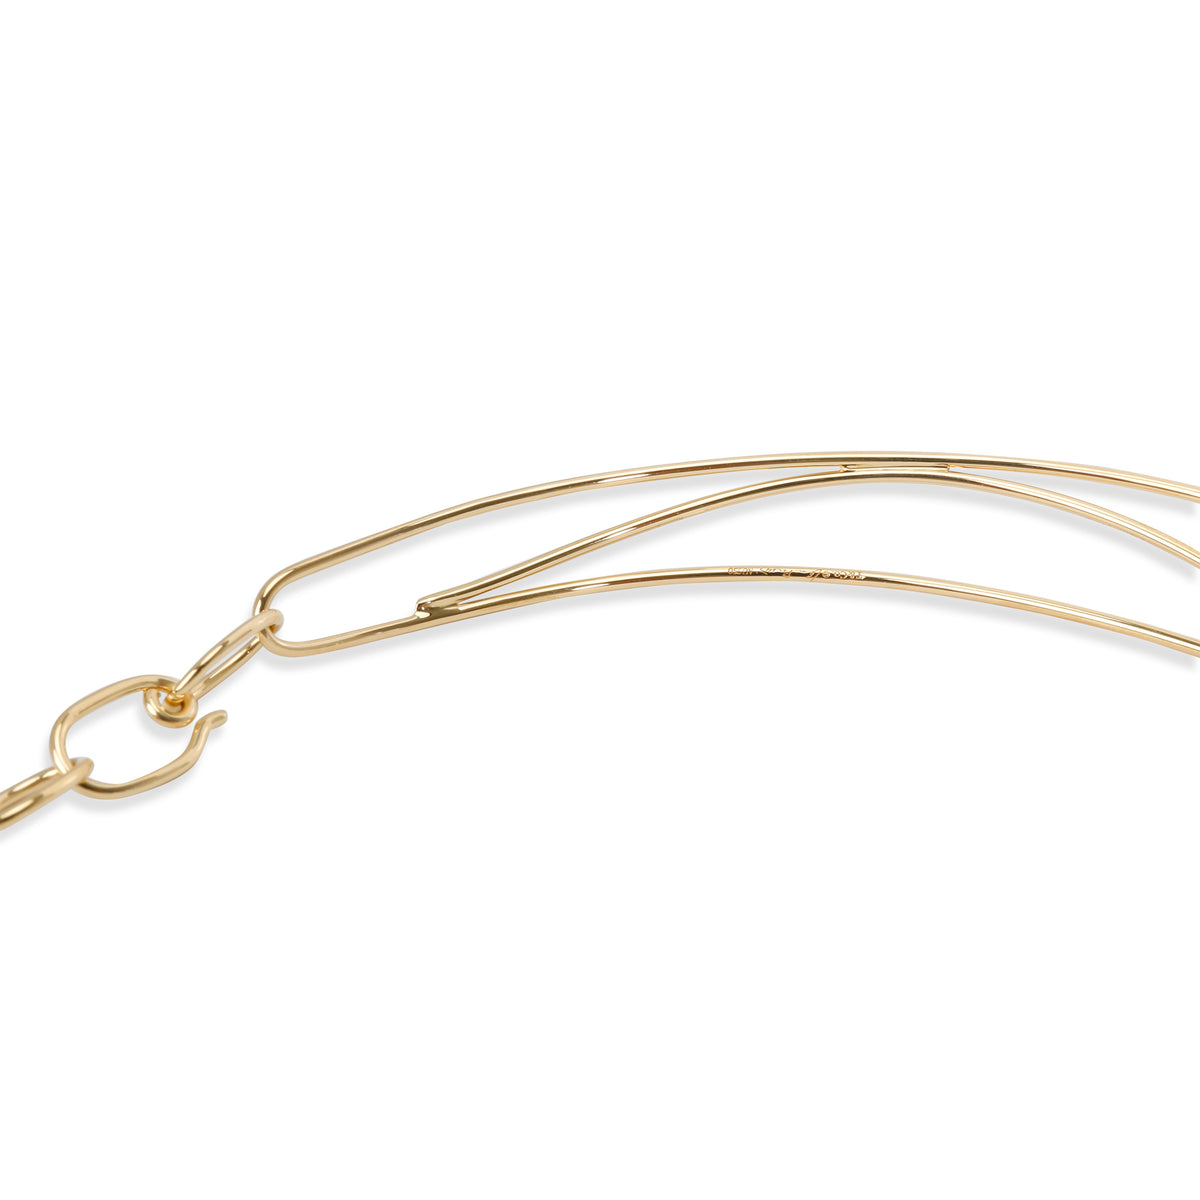 Tiffany & Co. Elsa Peretti Wave Necklace in 18K Yellow Gold